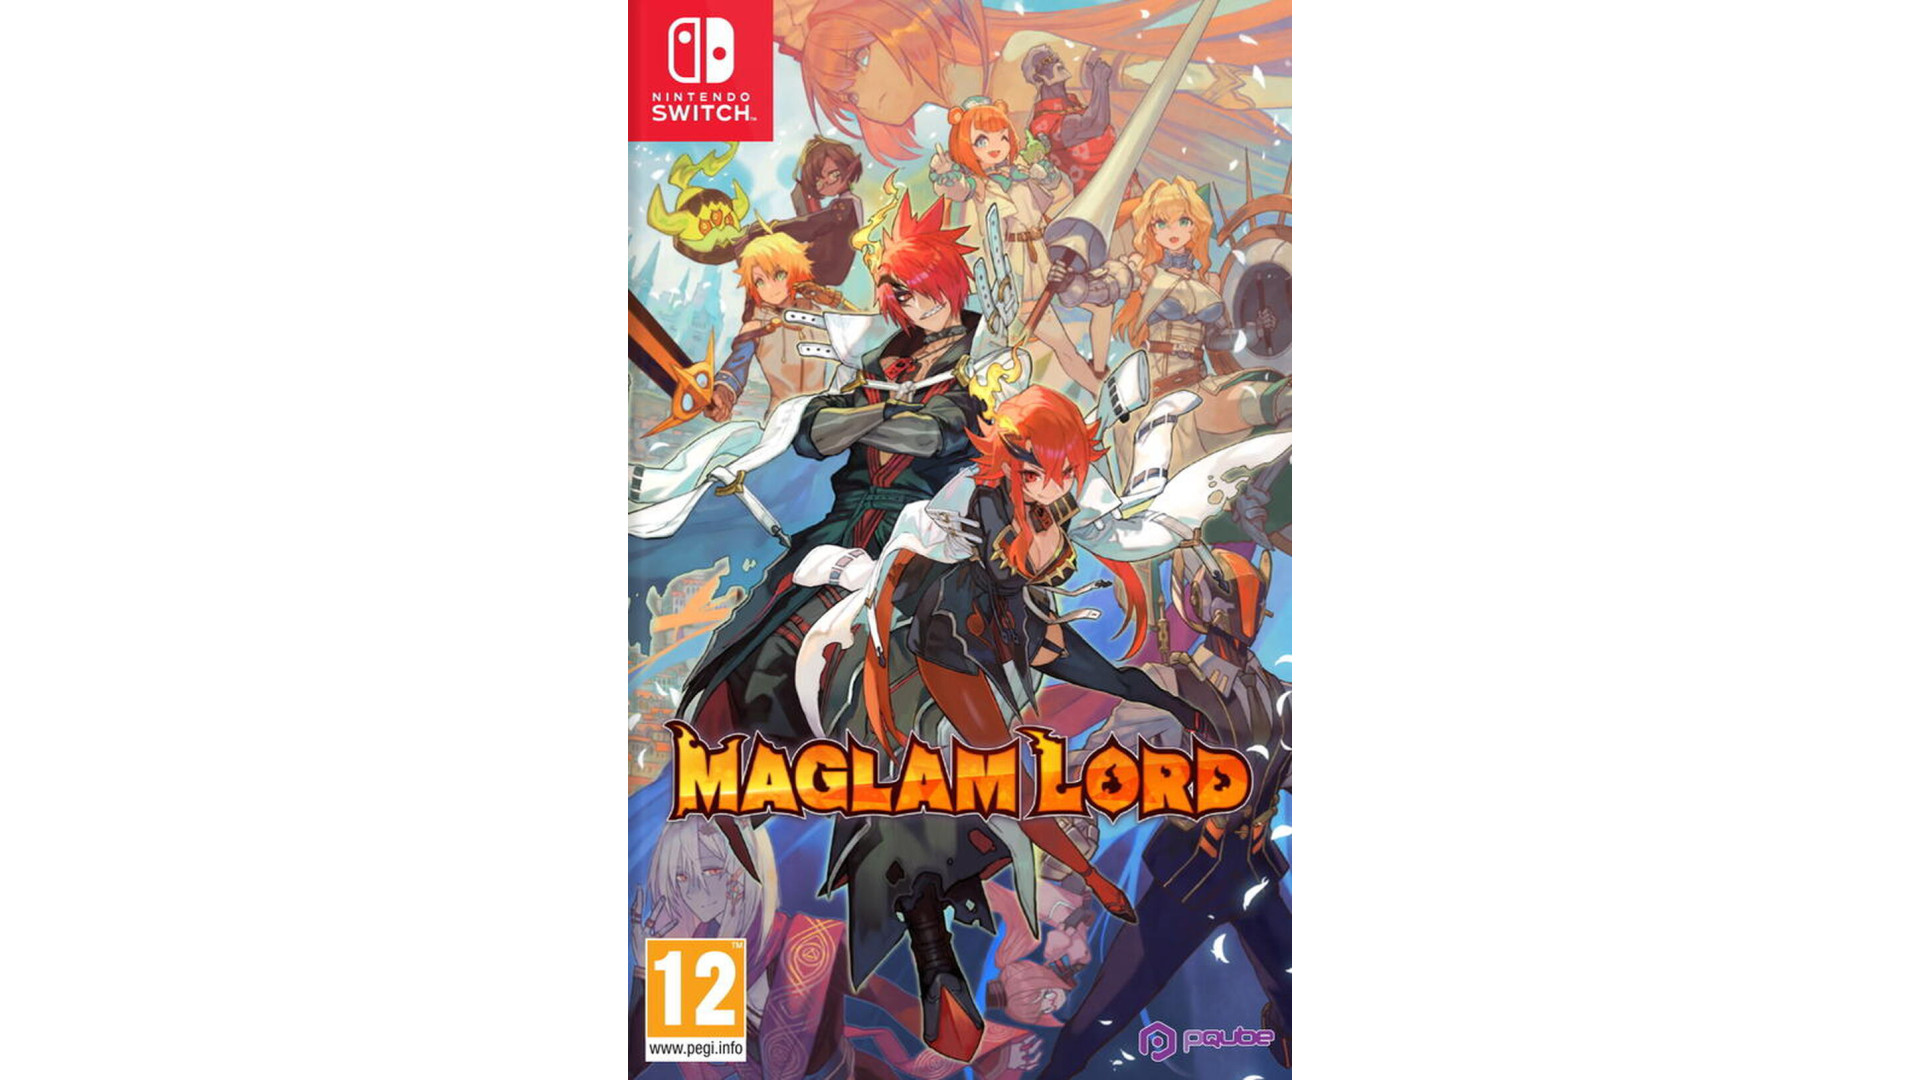 Acheter Maglam Lord SWITCH